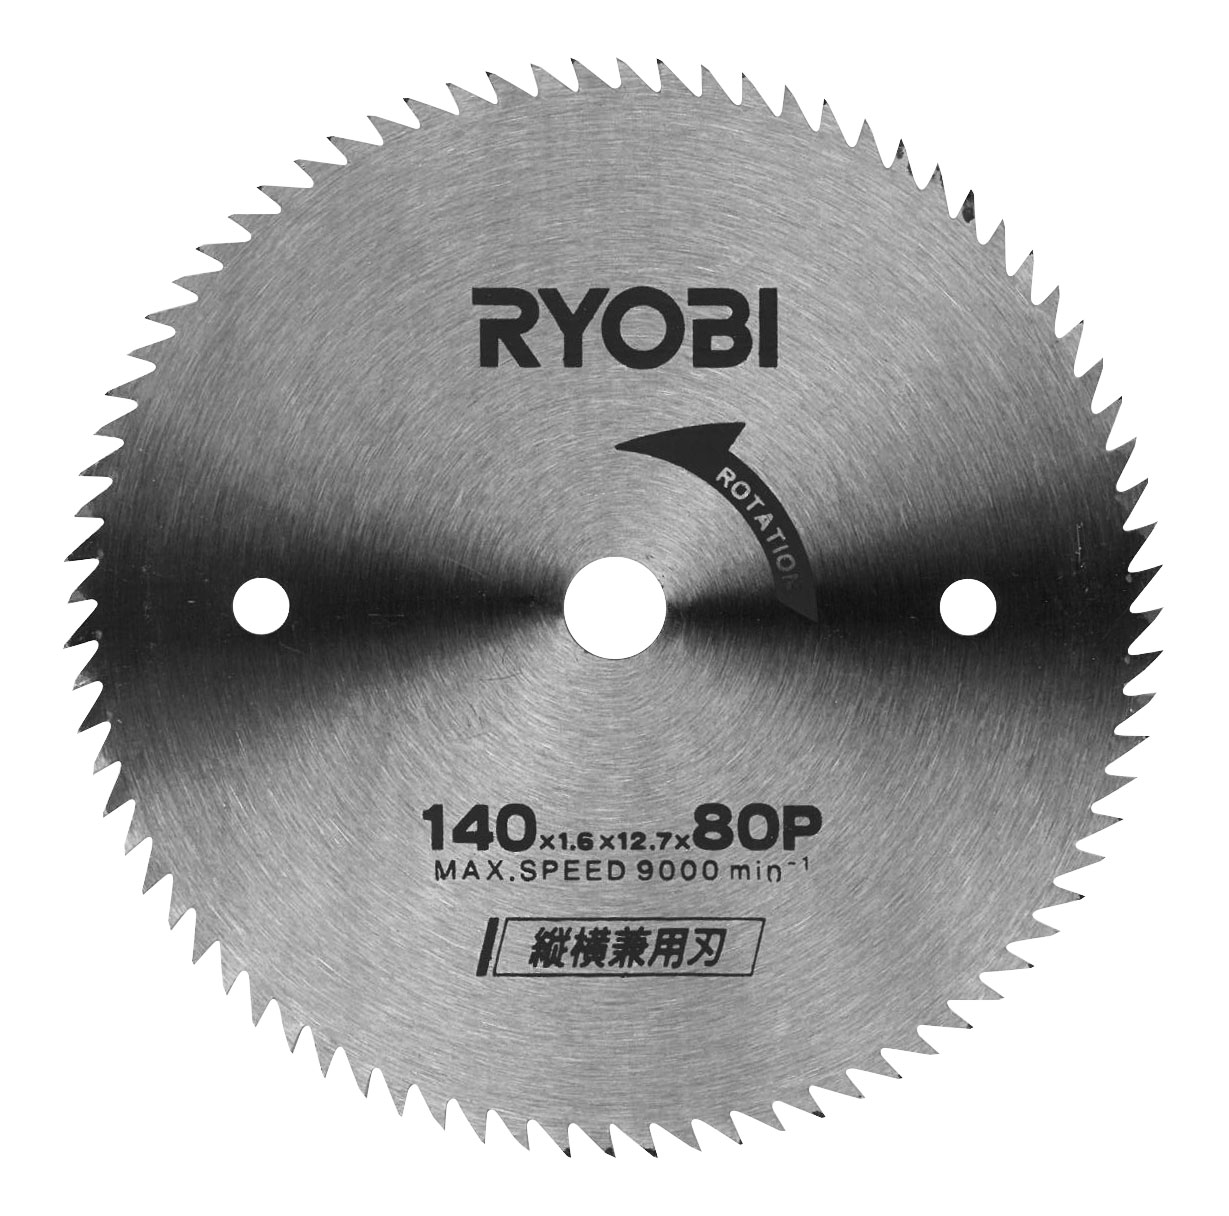 Combined Vertical and Horizontal Blade for Chip Saw for Circular Saw